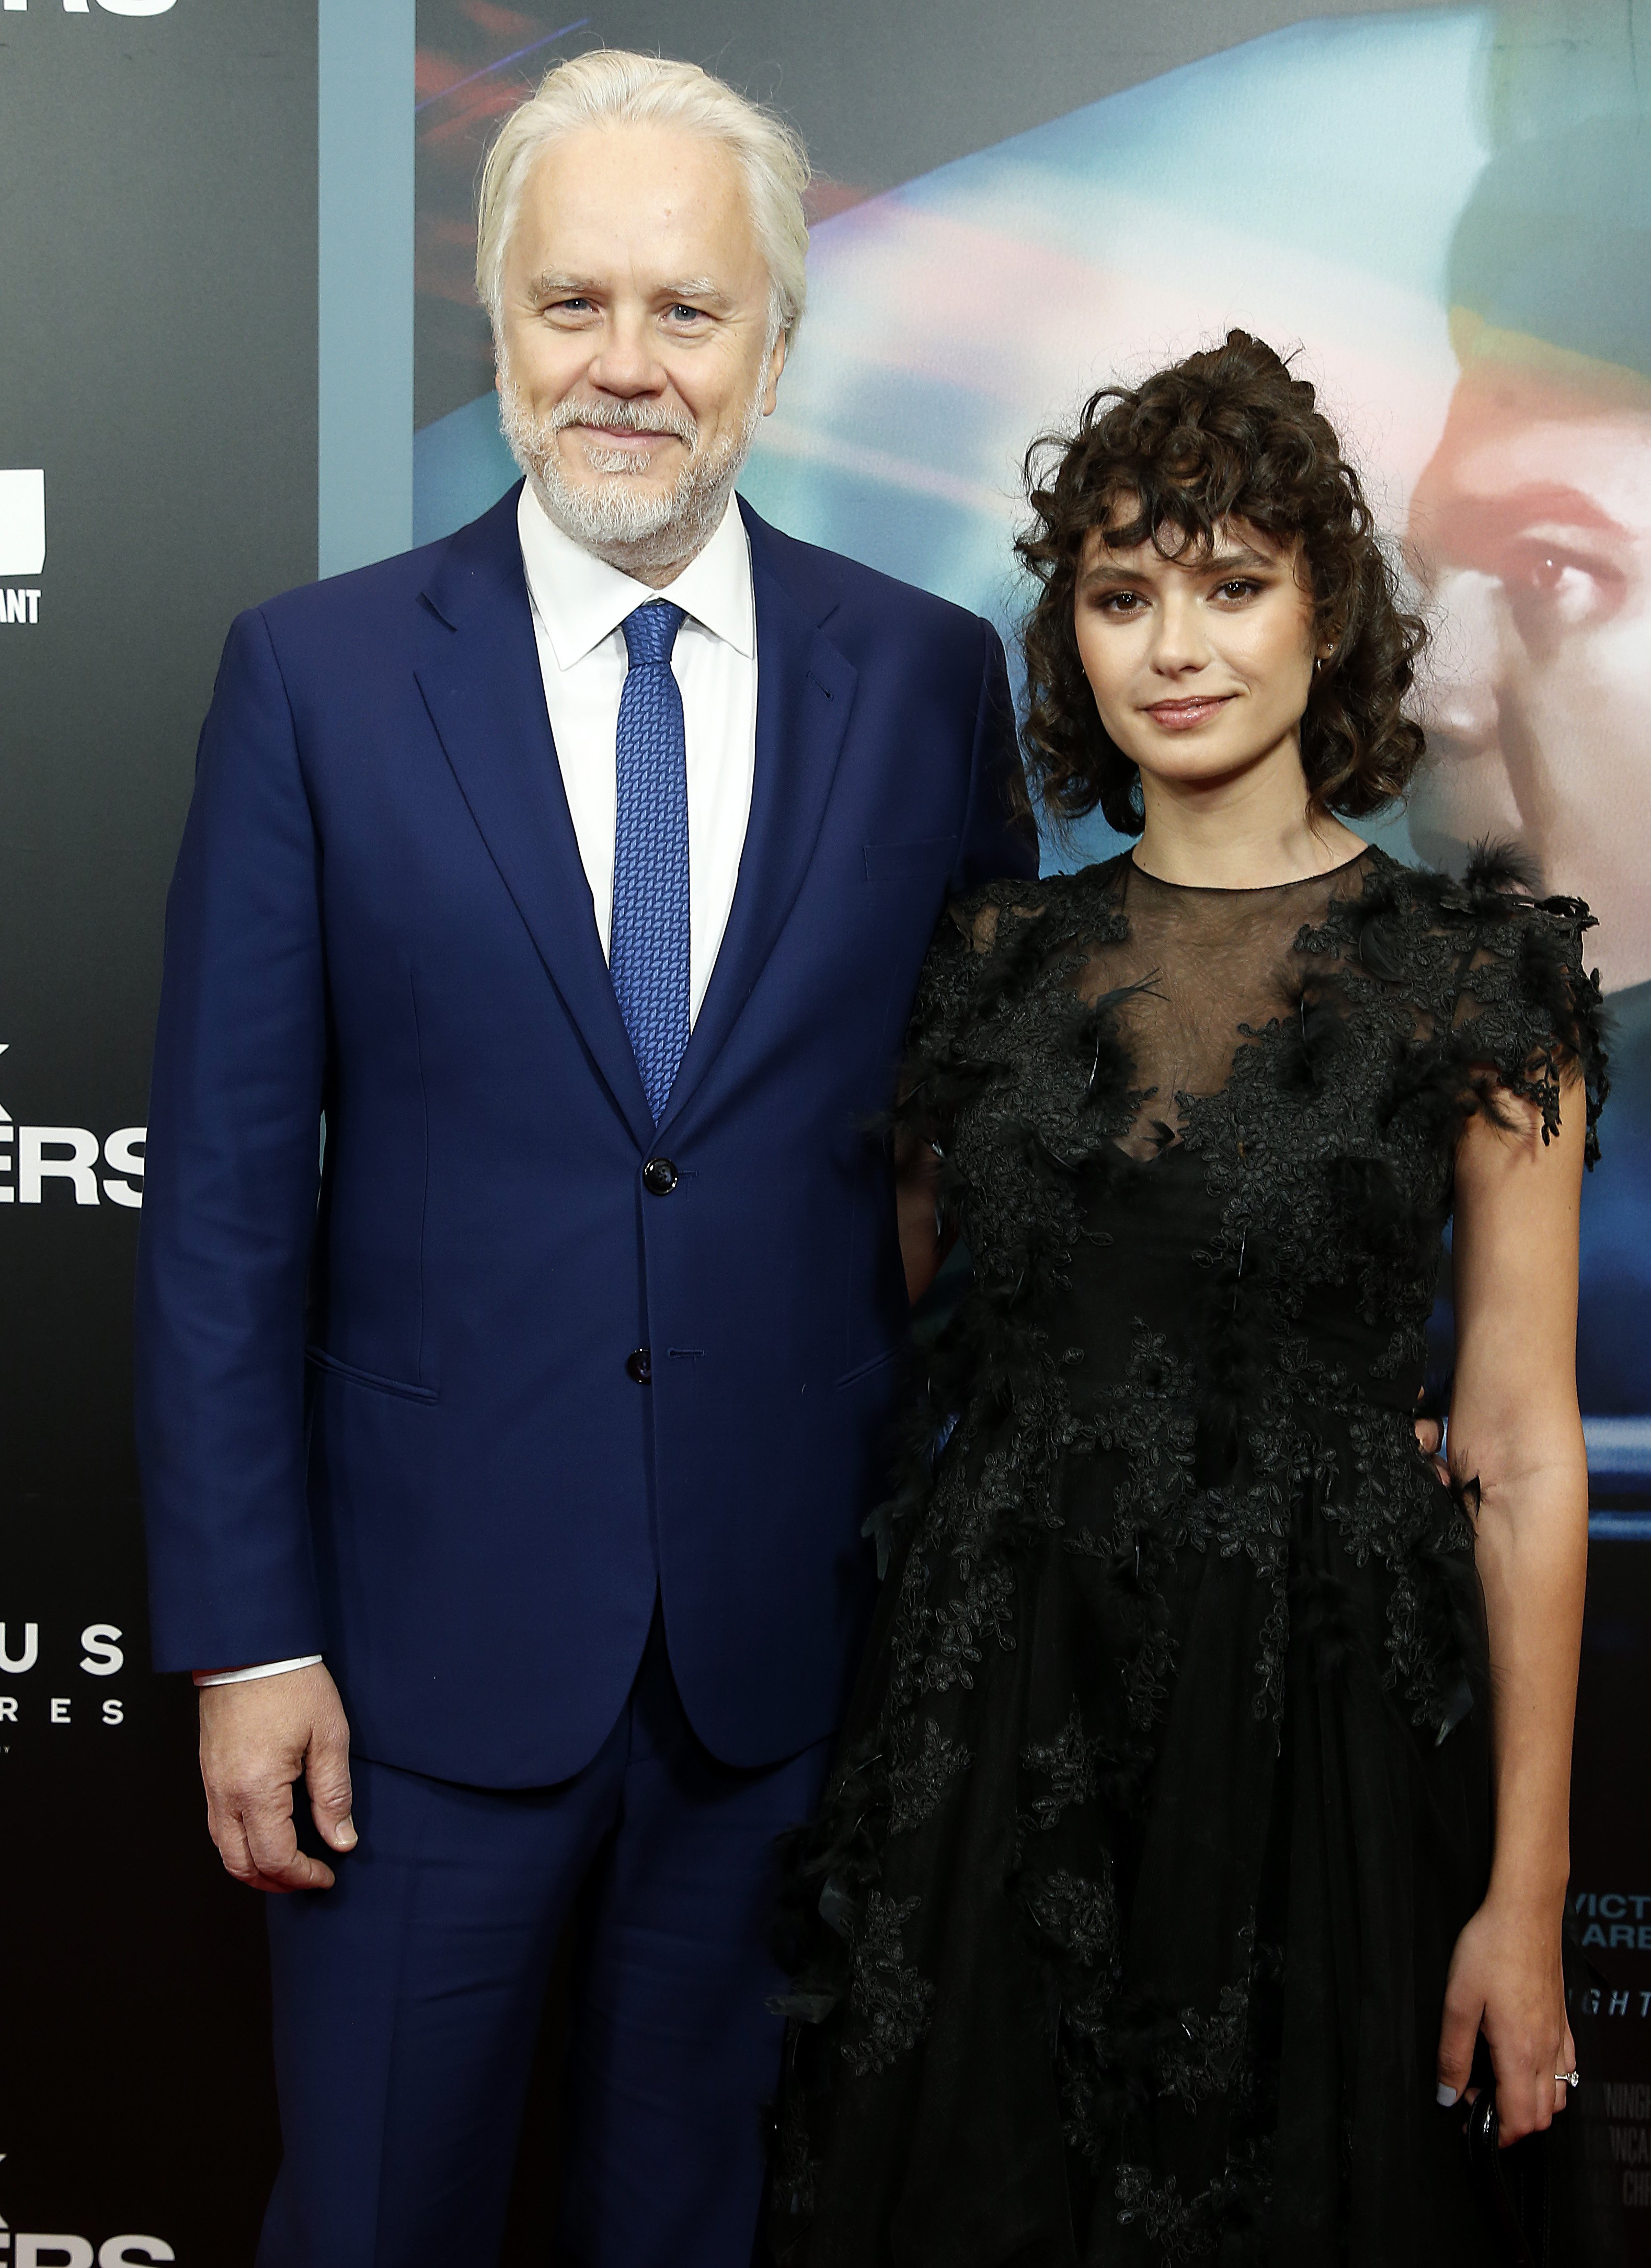 Tim Robbins and Gratiela Brancusi at the premier of "Dark Waters" in New York, November, 2019. | Photo: Getty Images.